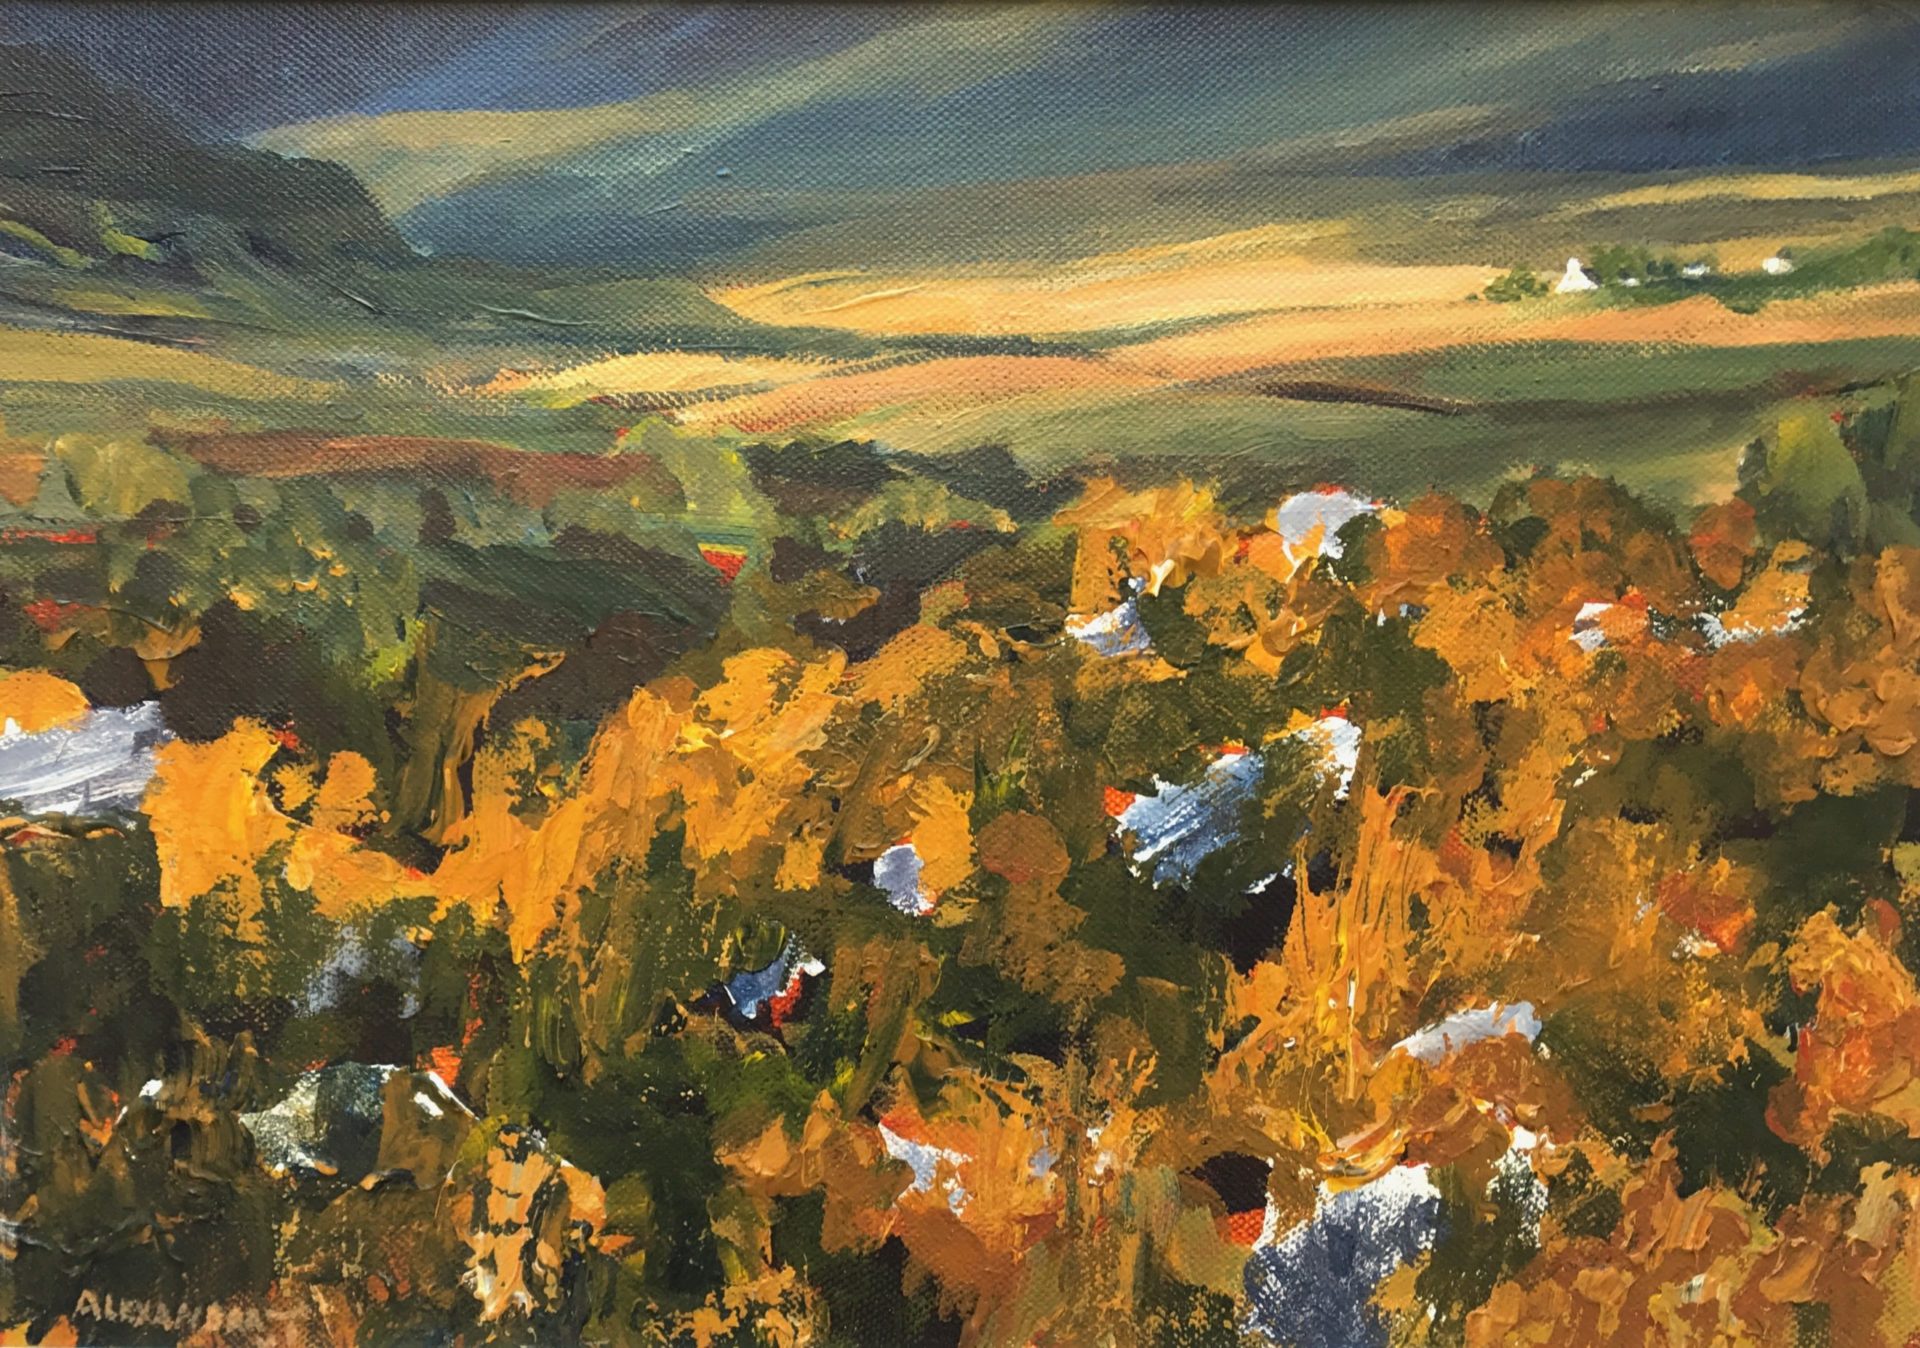 Into the Hills | Alexandra Van Tuyll – The Whitethorn Gallery